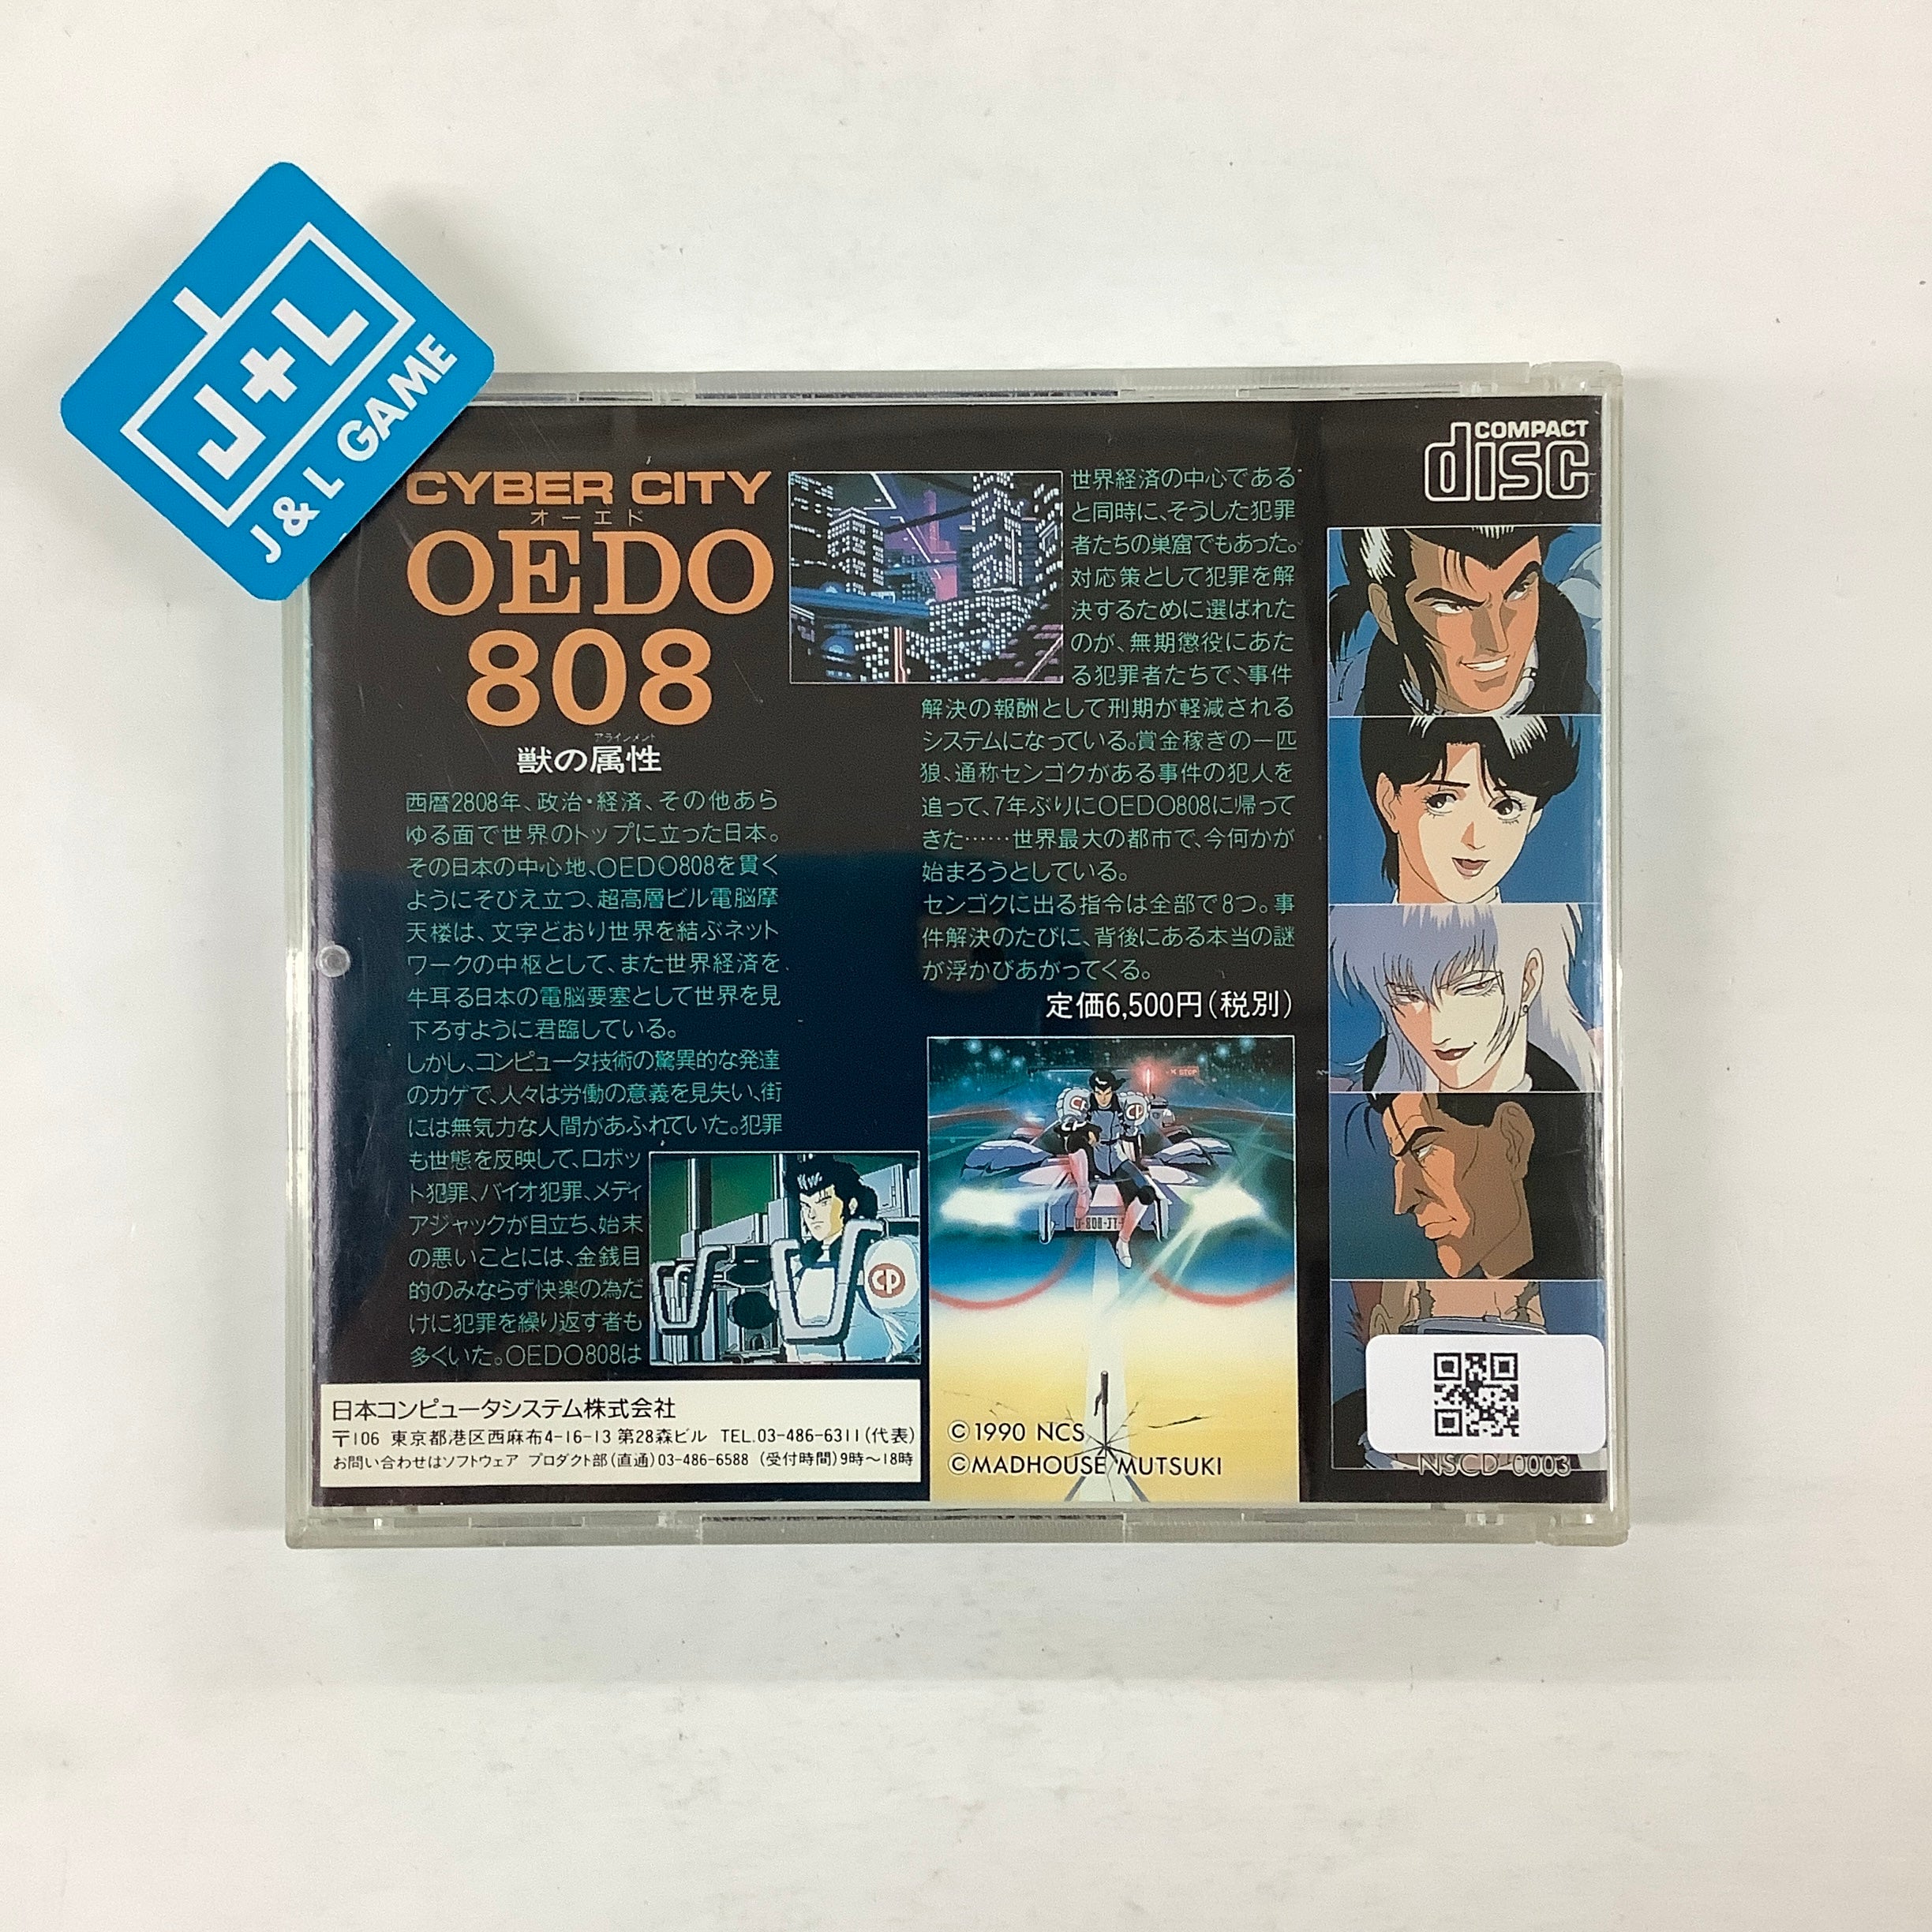 Cyber City Oedo 808 - Turbo CD (Japanese Import) [Pre-Owned] Video Games NCS   